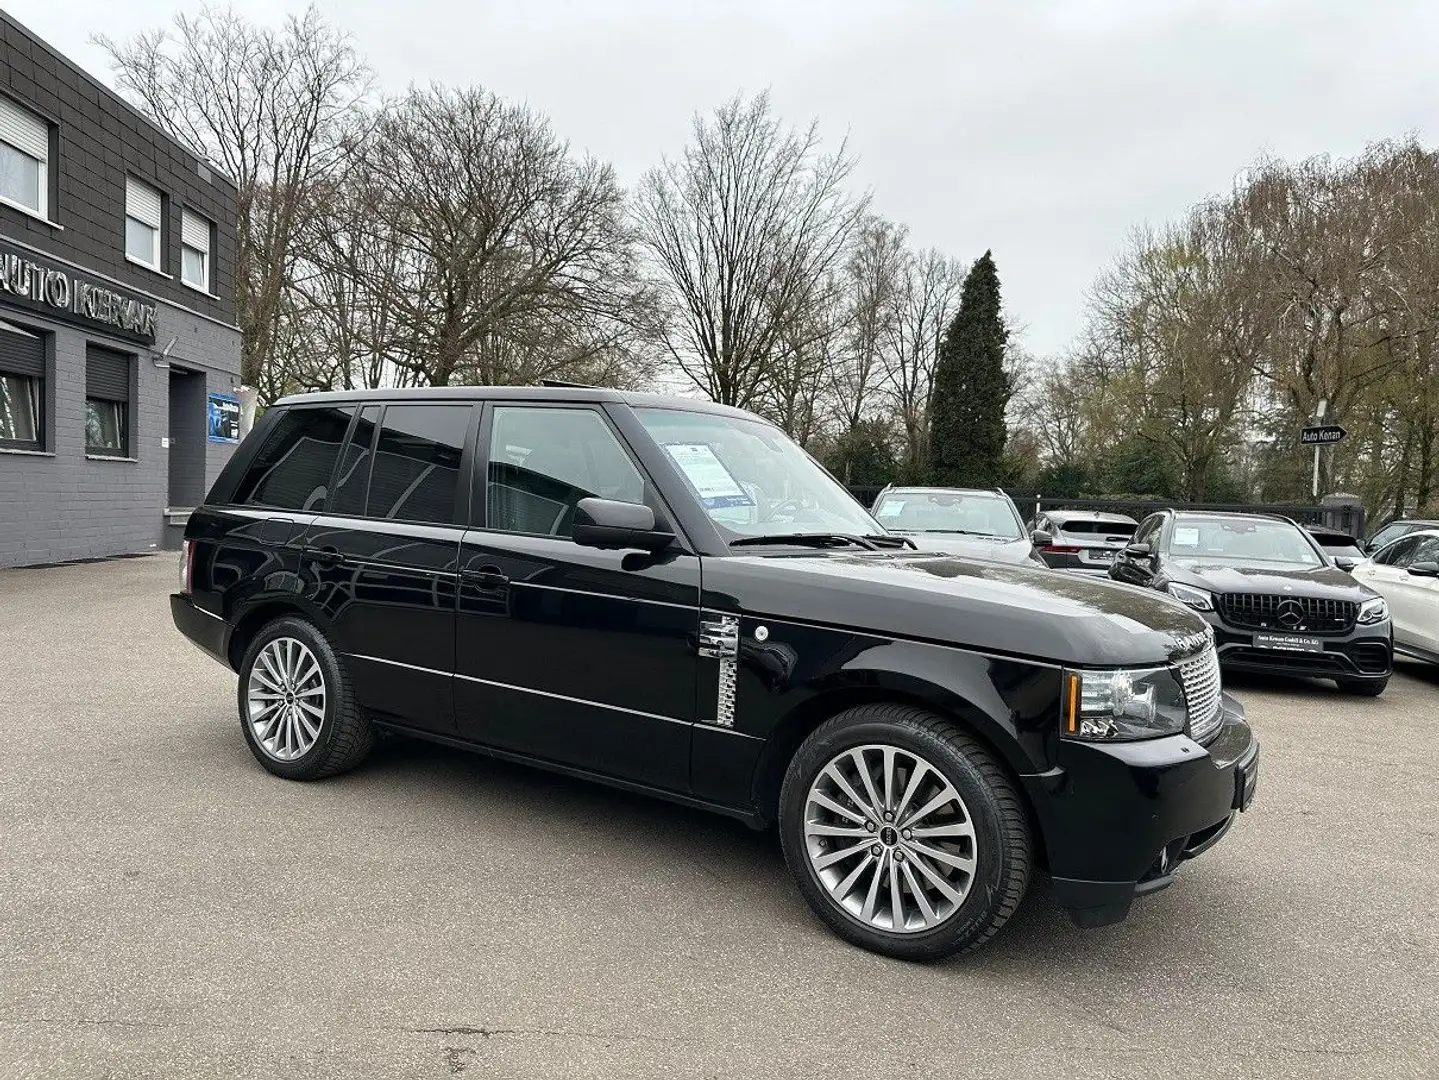 Land Rover Range Rover TDV8 Westminster last Edition/1of300 crna - 2